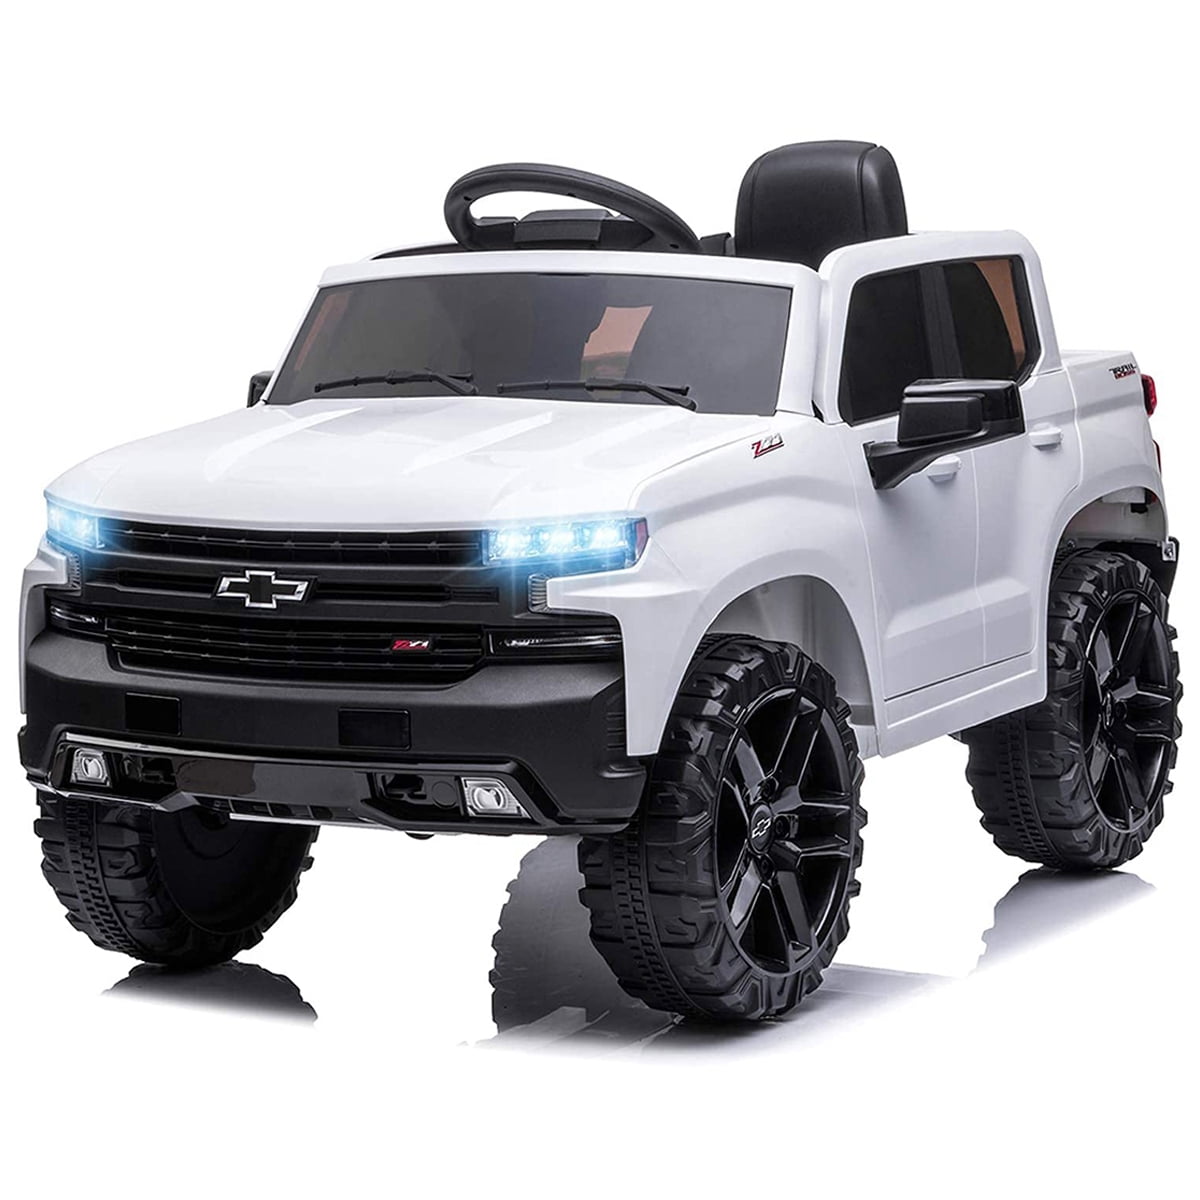 Kimbosmart Chevrolet Silverado 12V Kids Electric Ride on Toy Car with Remote Control, Storage Truck, LED Lights, Music Player, Safety Belt